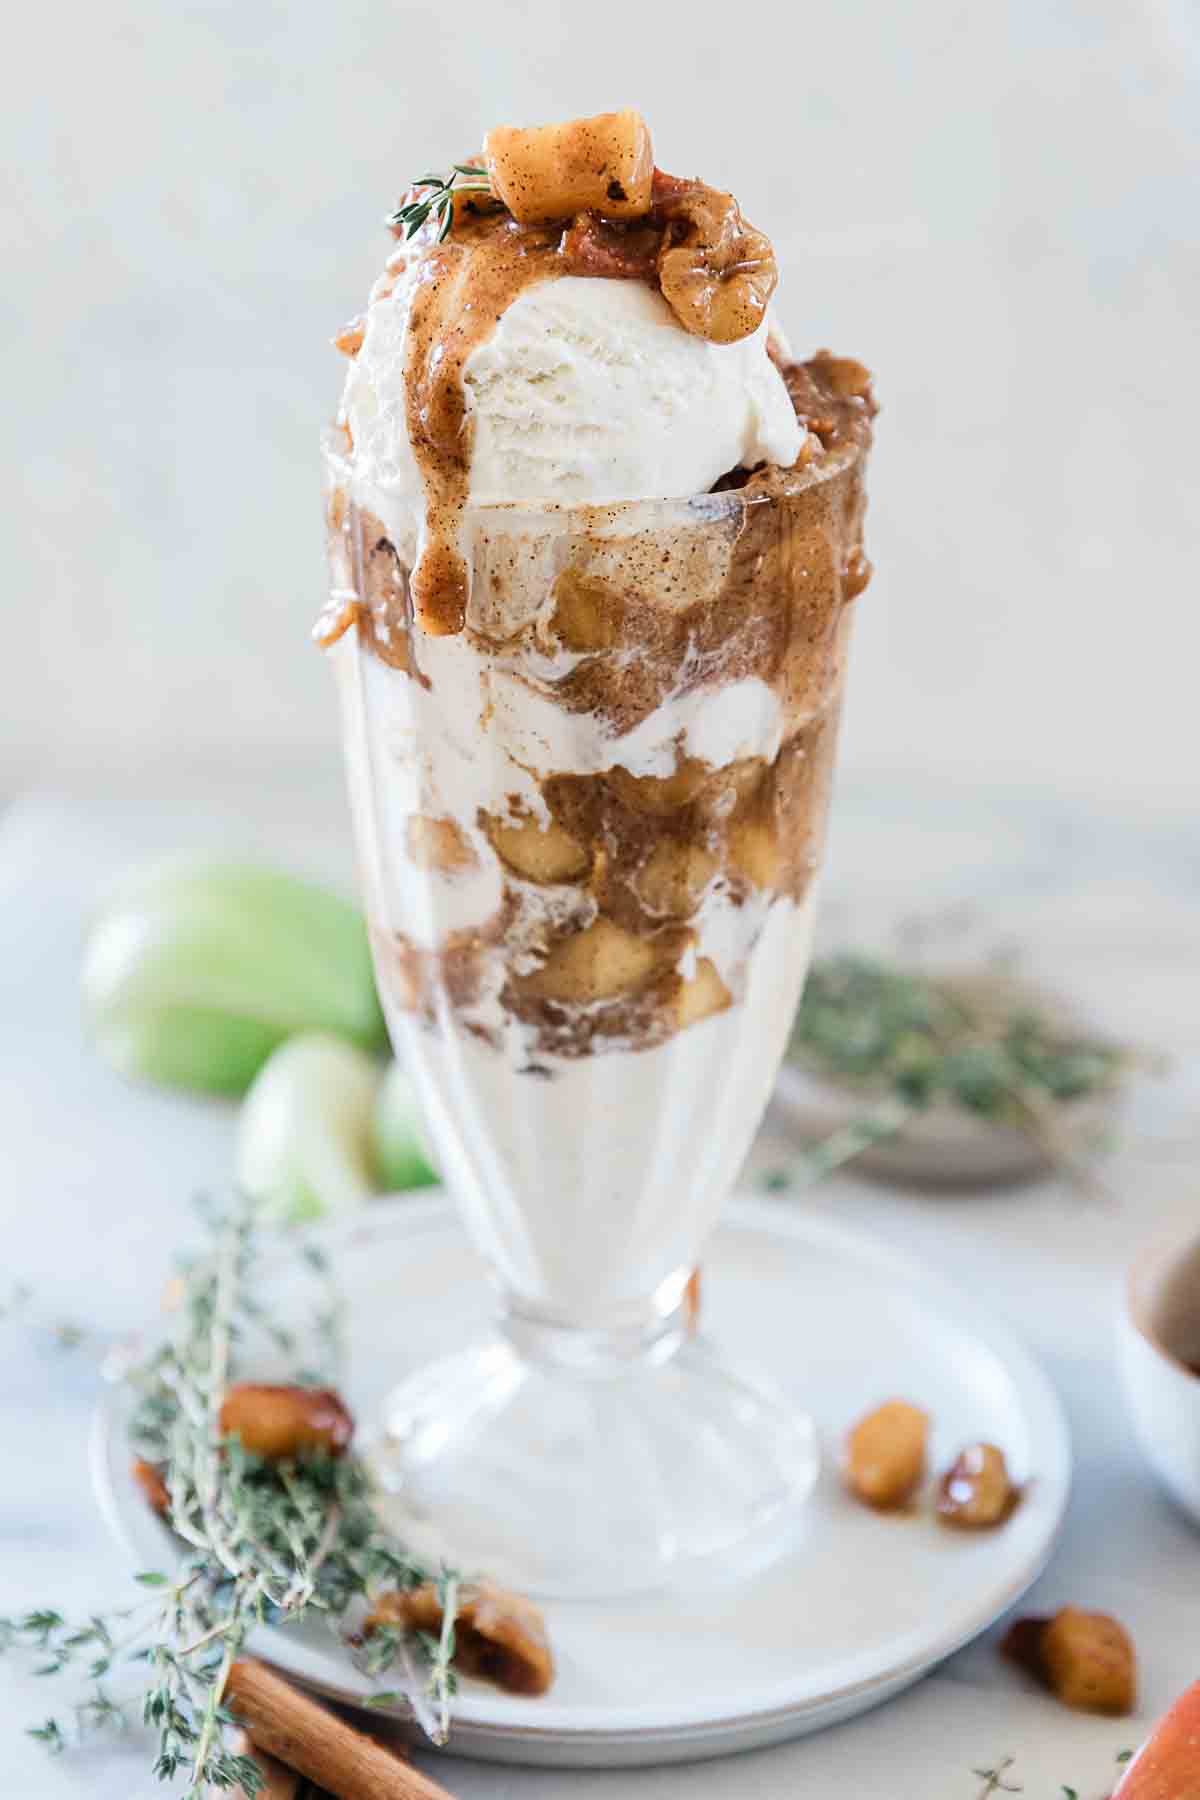 Ice cream in a sundae glass topped with cinnamon apples recipe.